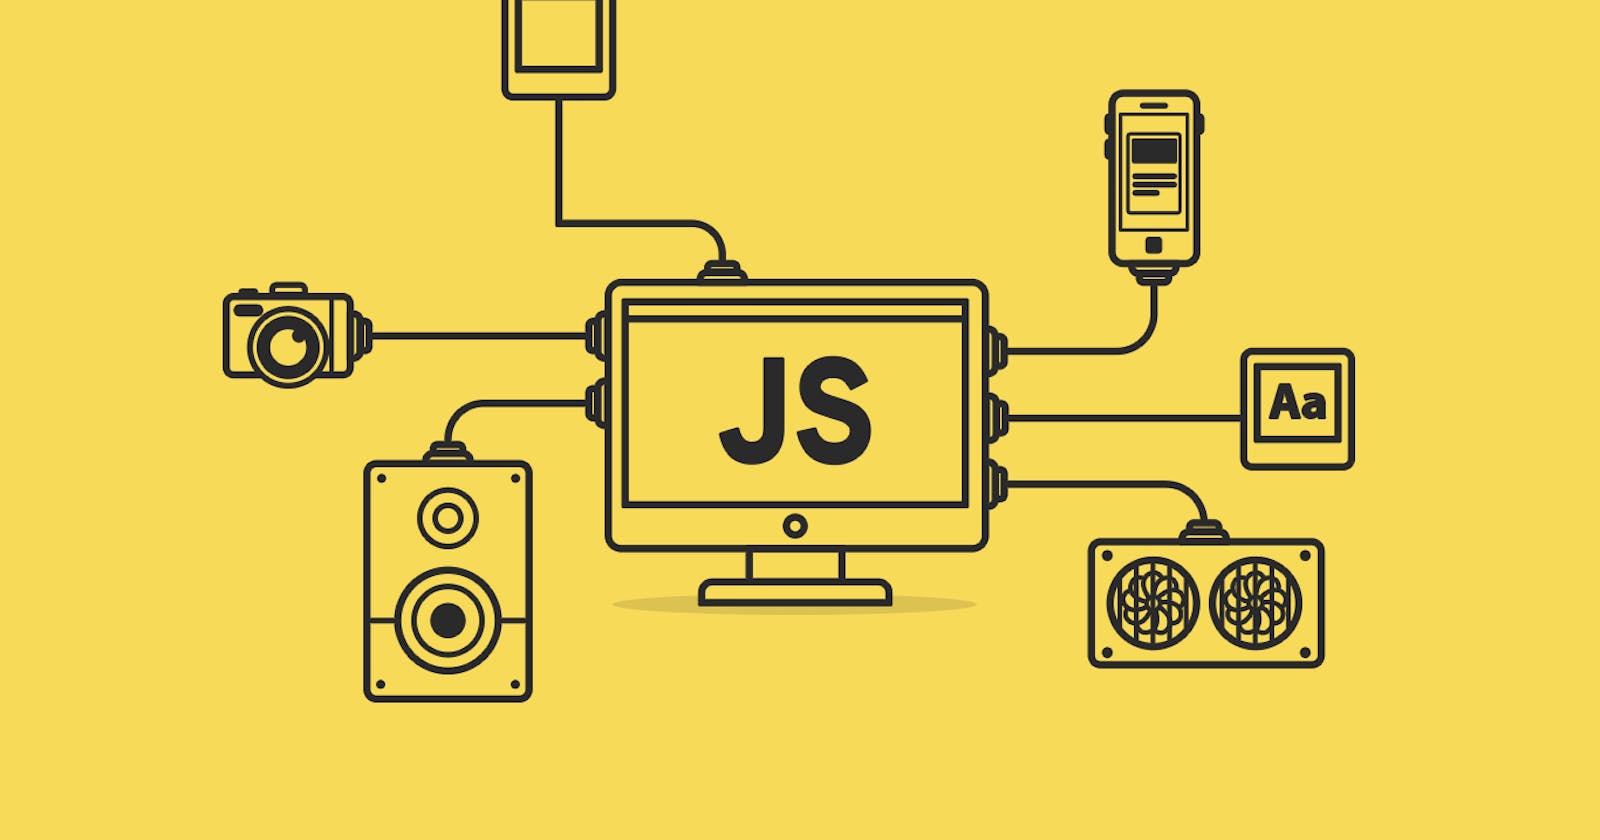 call,apply and bind in javascript